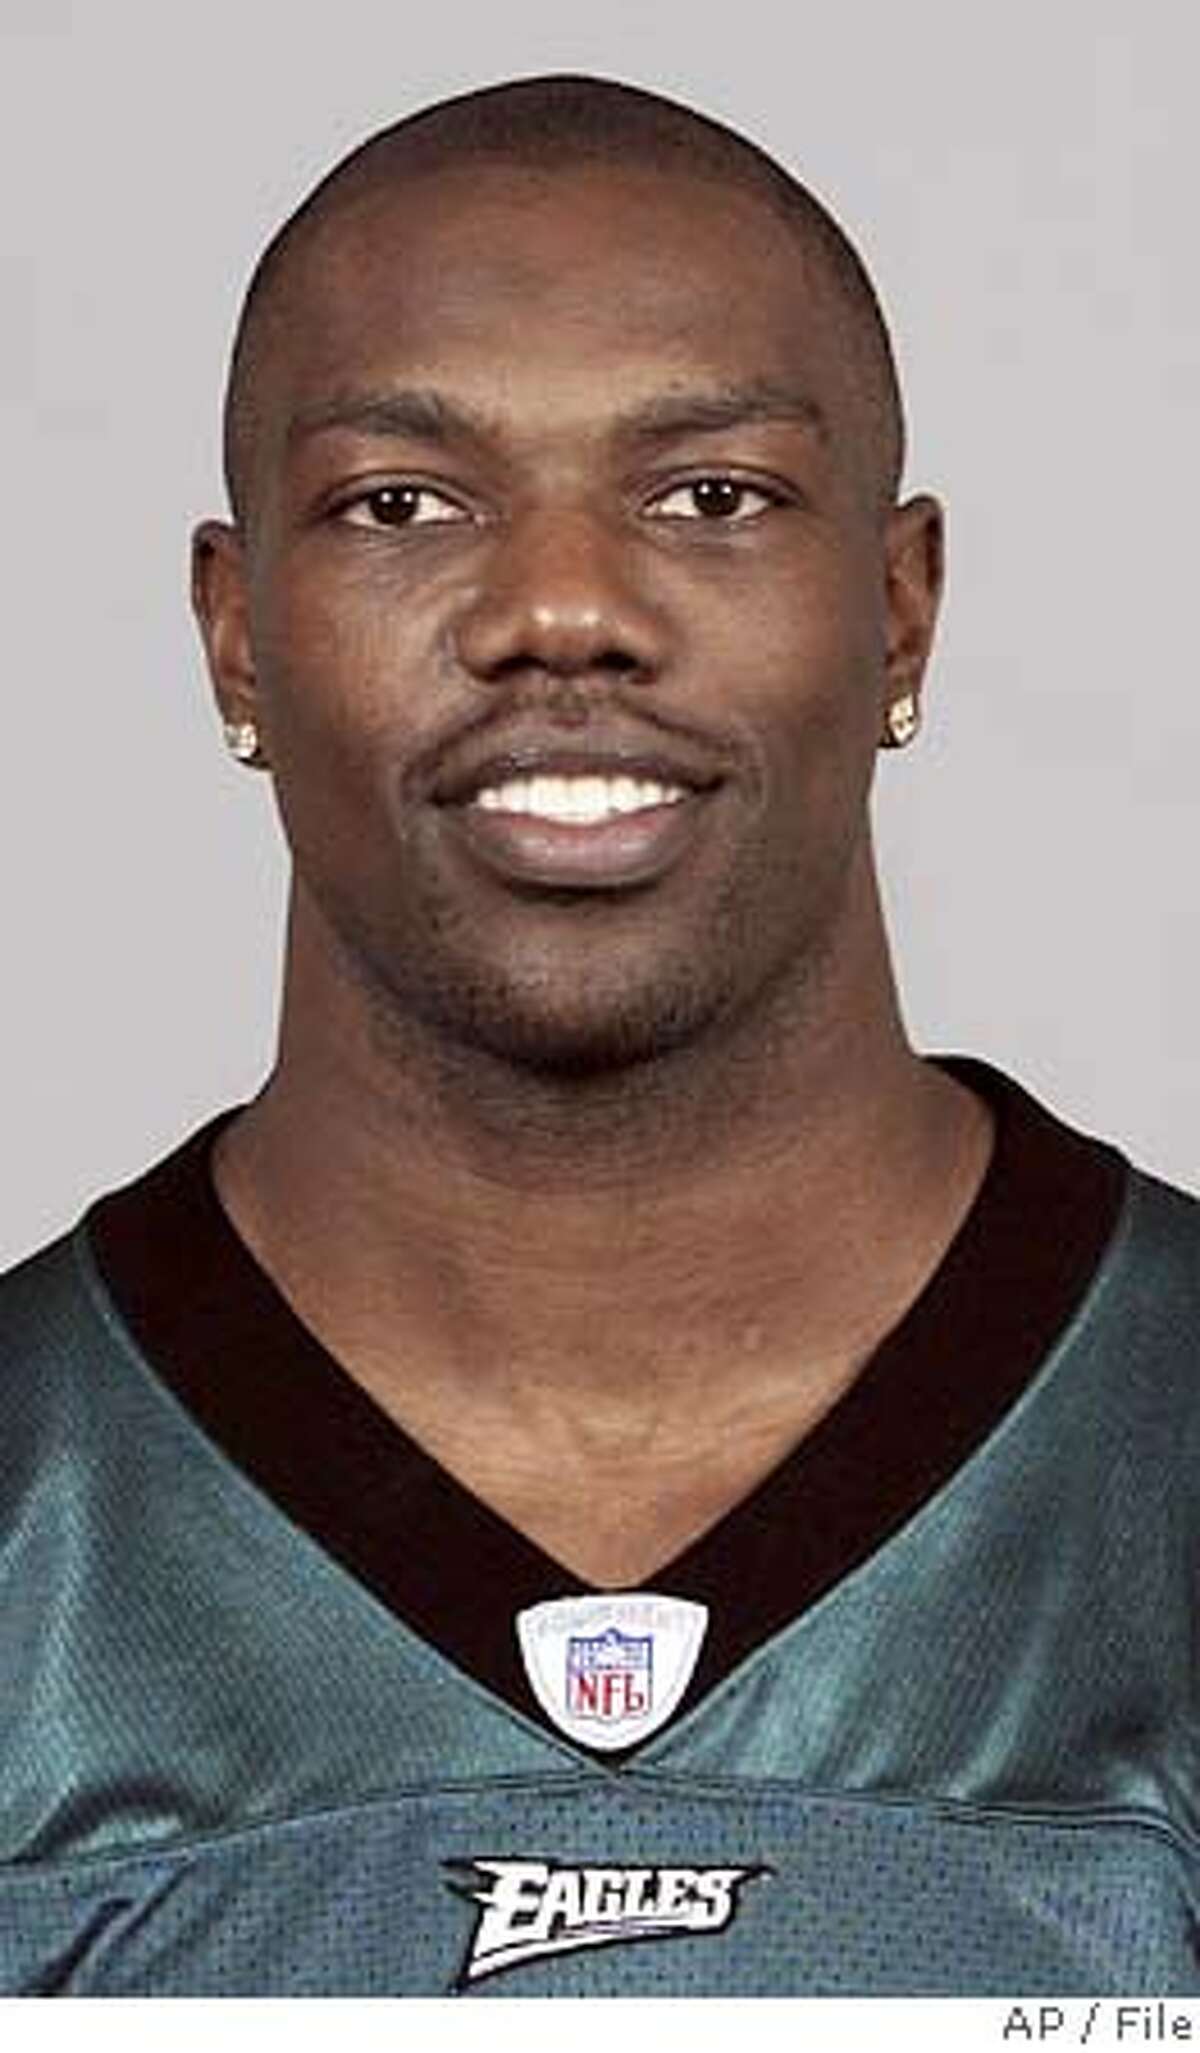 terrell owens today